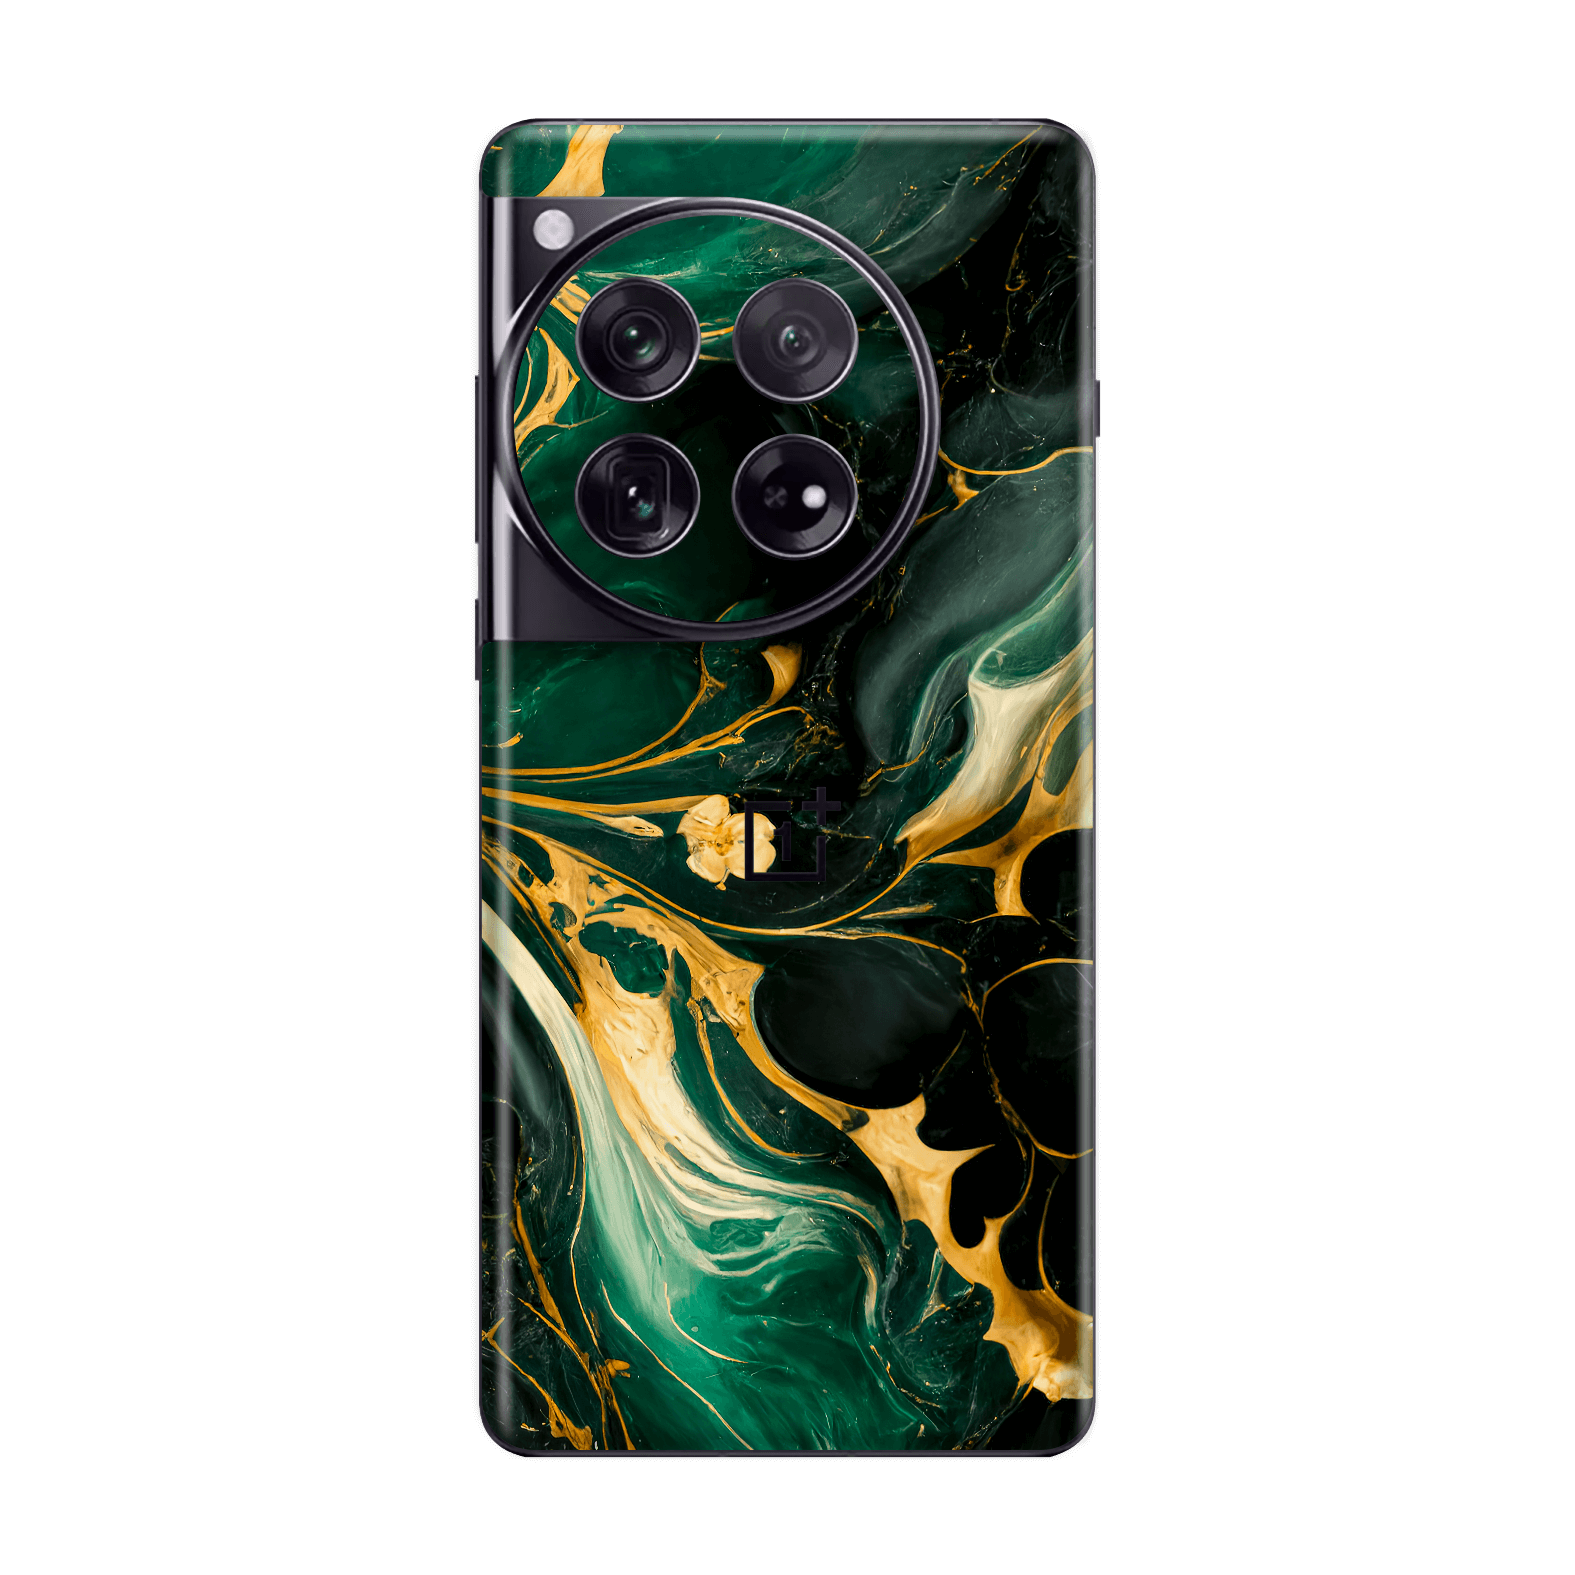 OnePlus 12 Print Printed Custom SIGNATURE Agate Geode Royal Green Gold Skin Wrap Sticker Decal Cover Protector by QSKINZ | qskinz.com